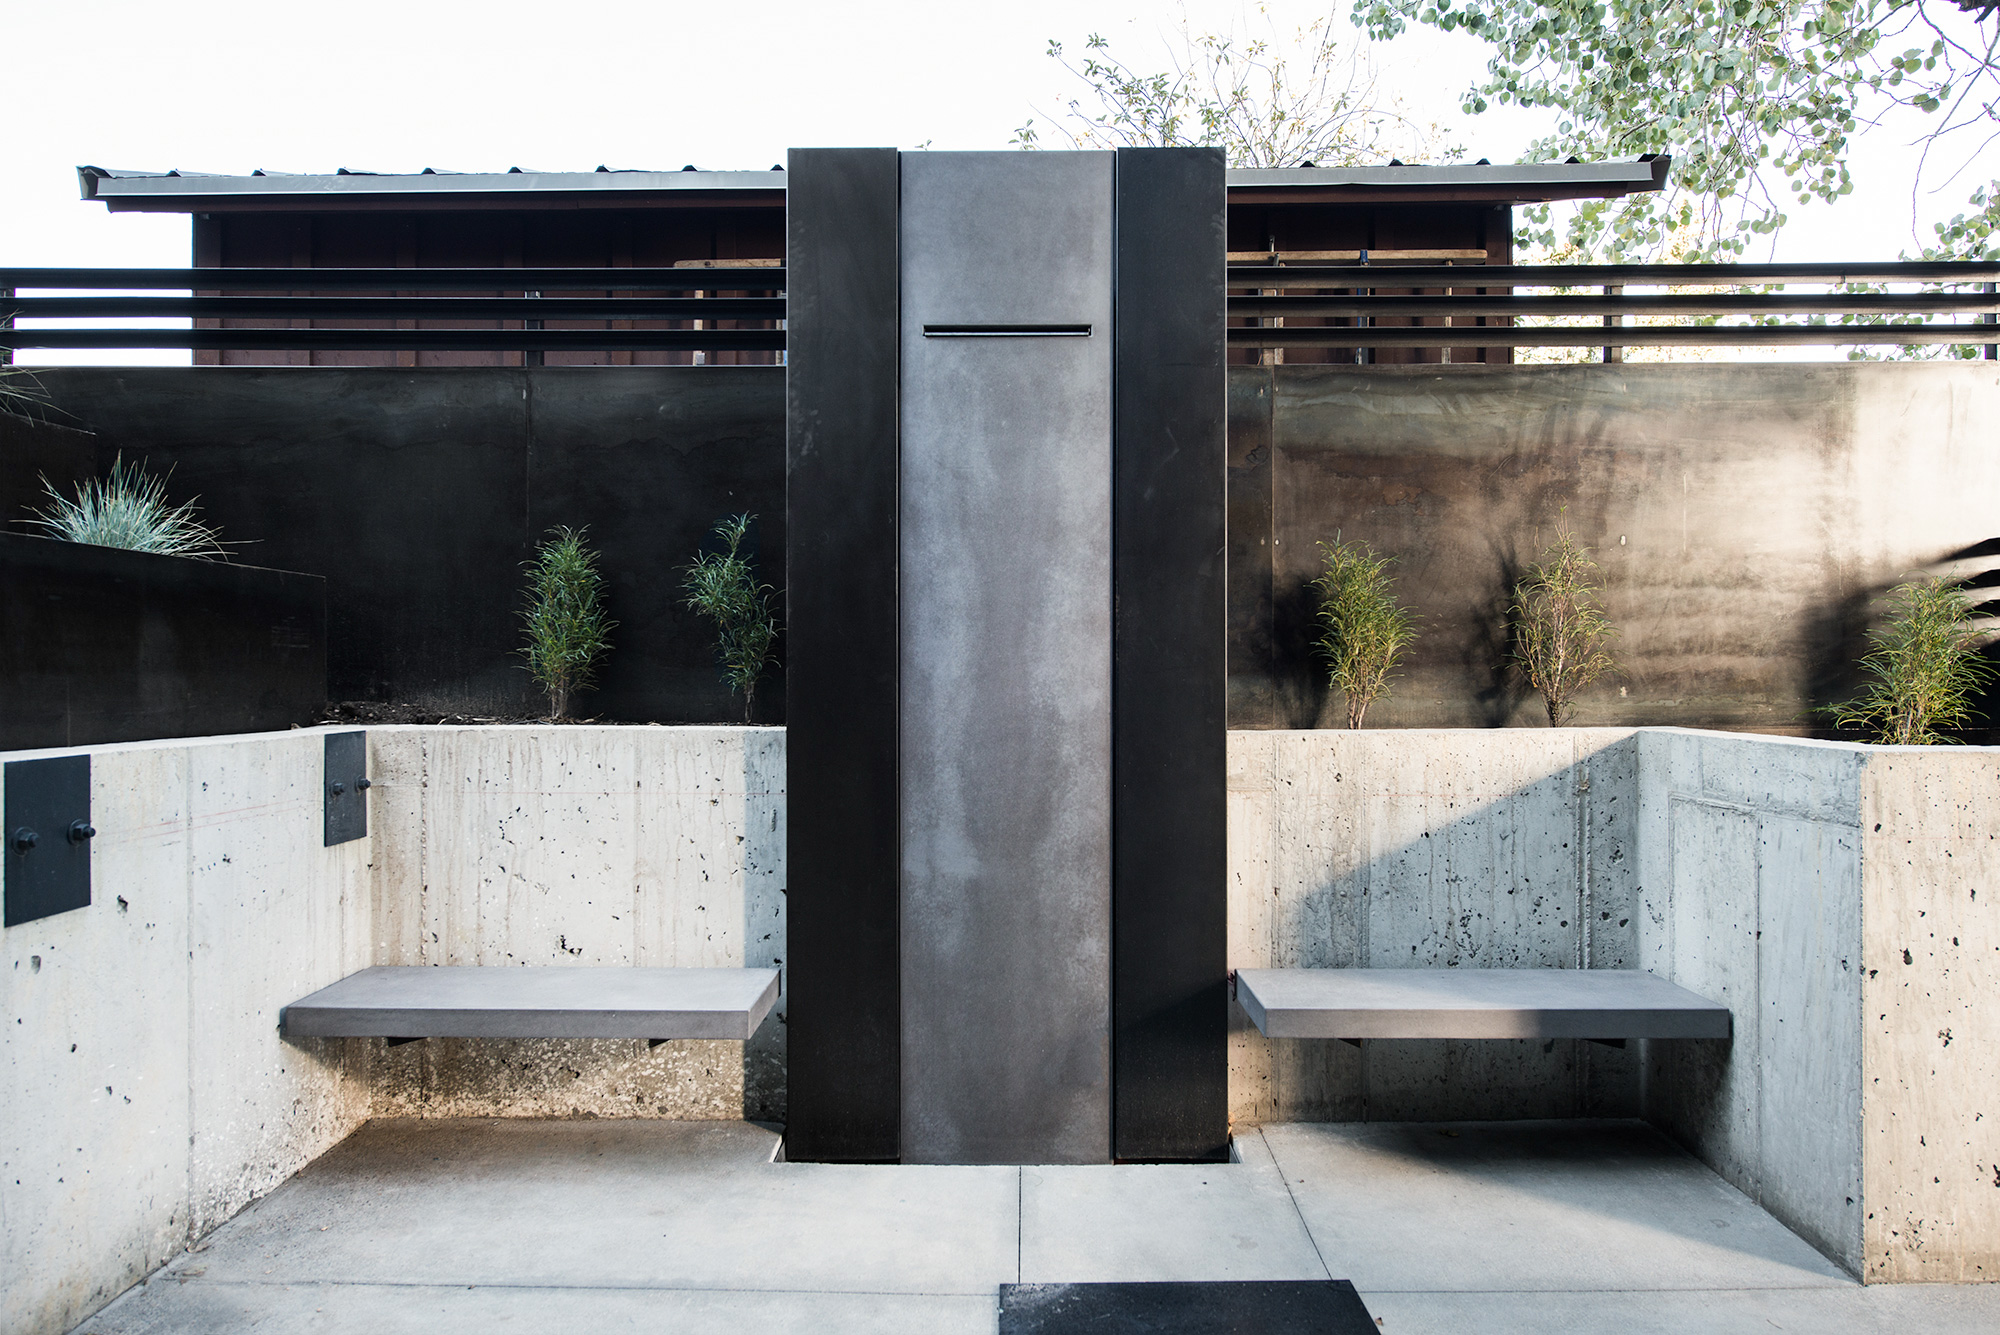 EARL GRAY II CONCRETE BENCHES WITH THE DIGNIFIED WATER FEATURE  